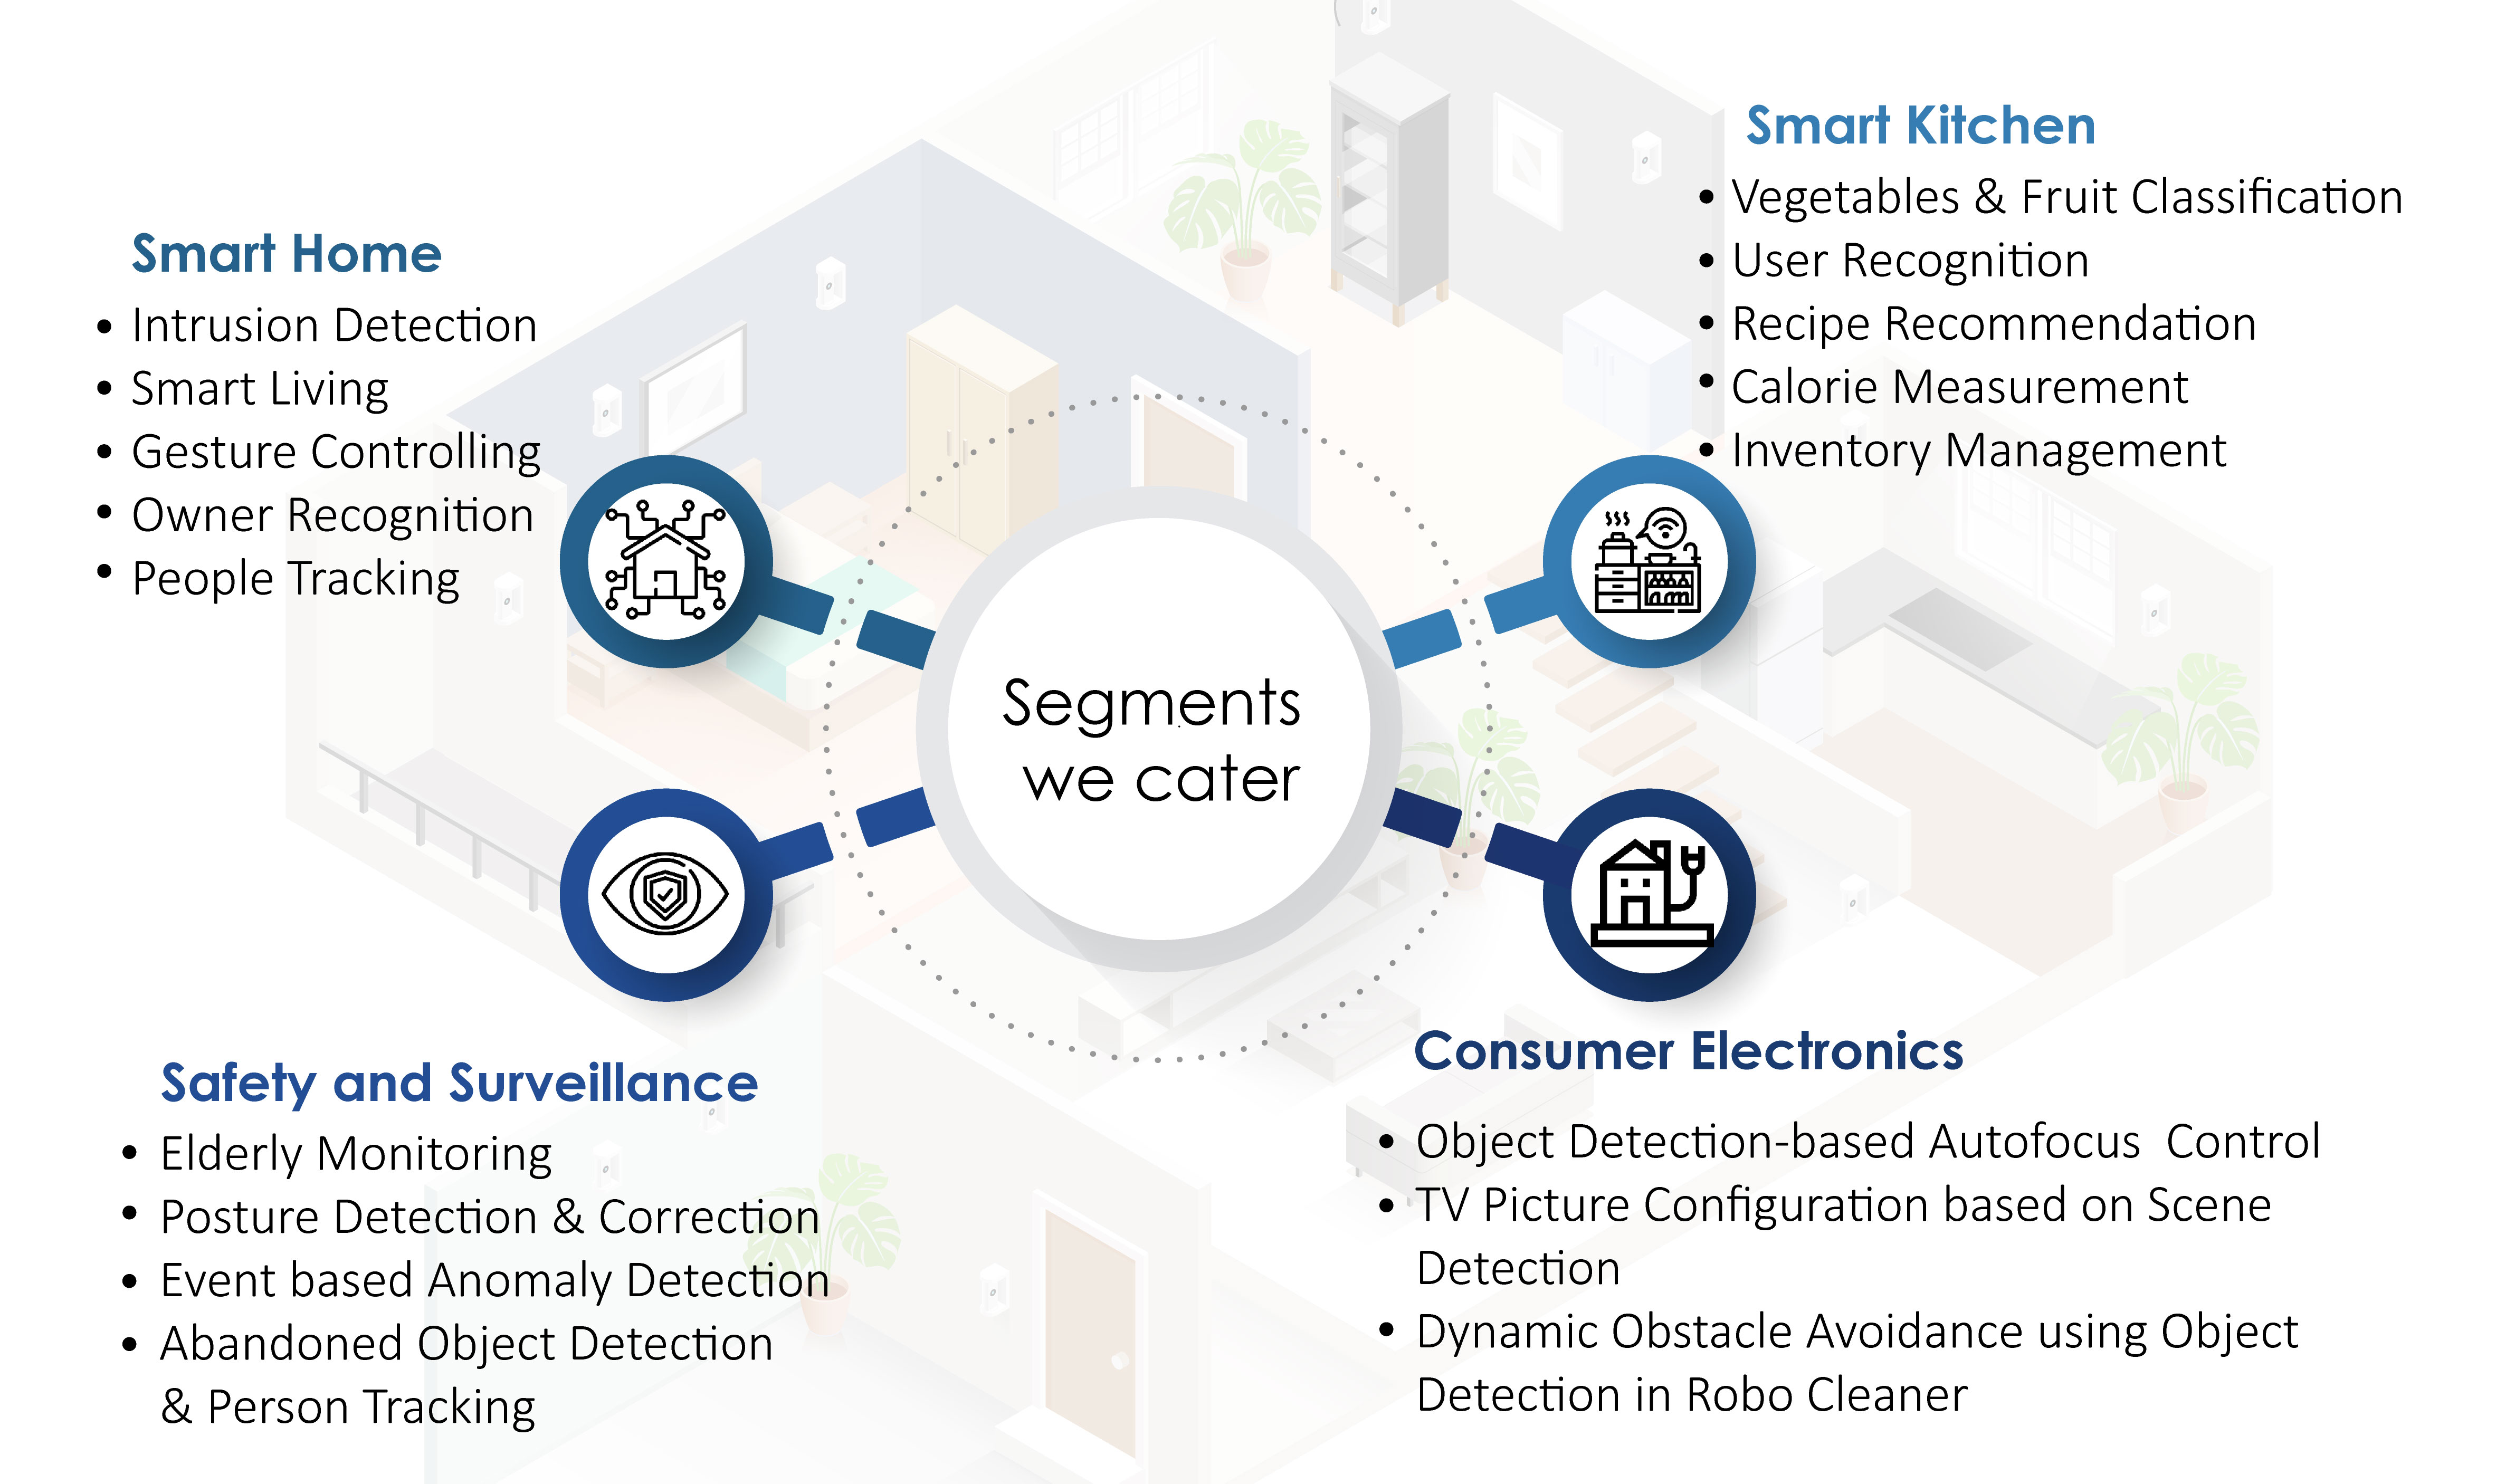 Segmentation and offerings in AI/ML, IoT based solutions